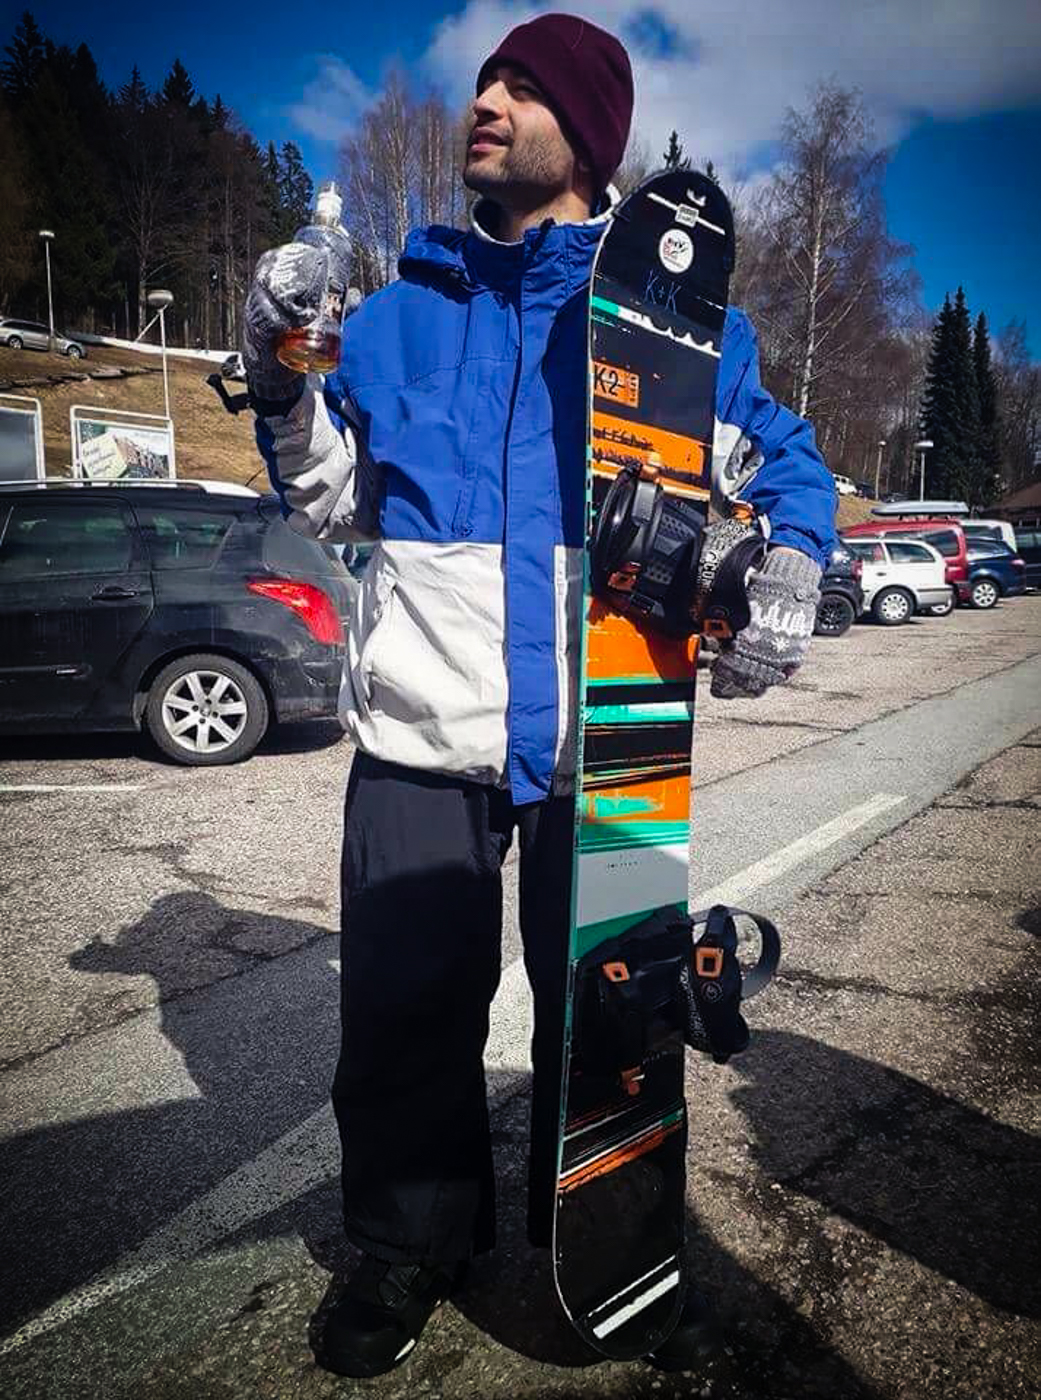 Tiago holding a snowboard and a bottle at the ski area in Czech Republic